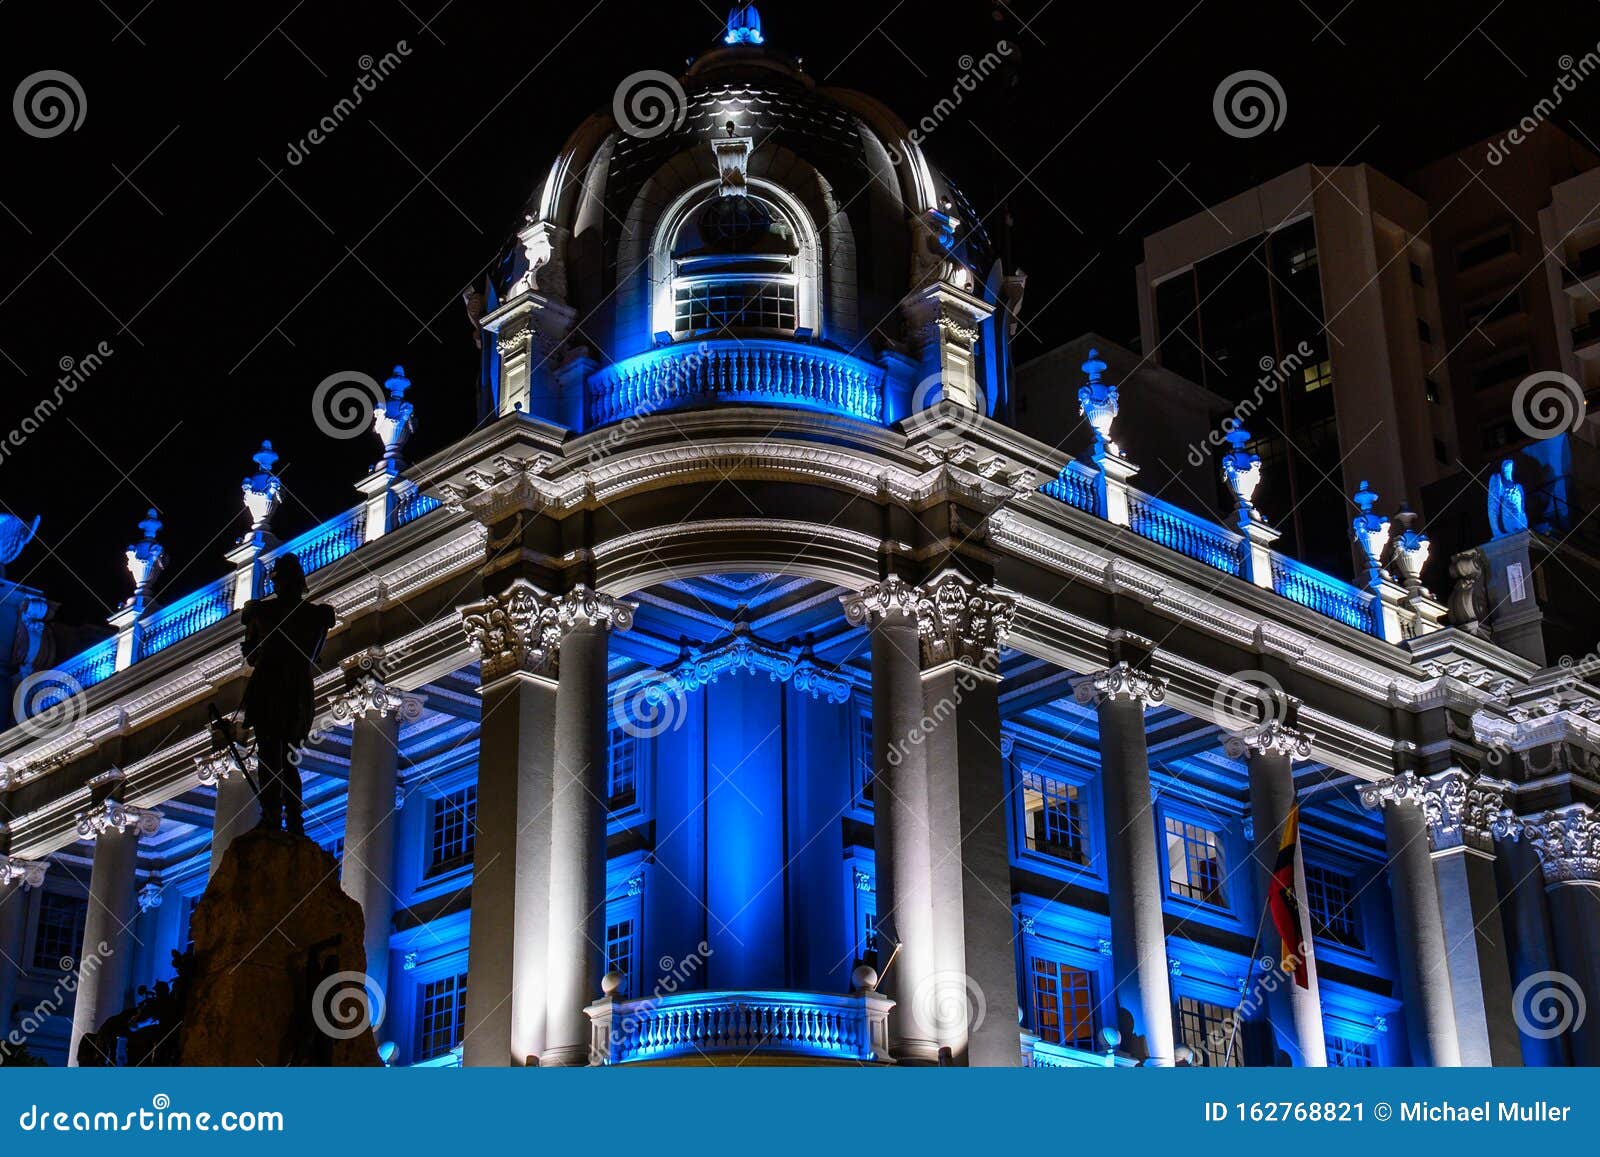 the townhall of guayaquil illuminated with blue lights